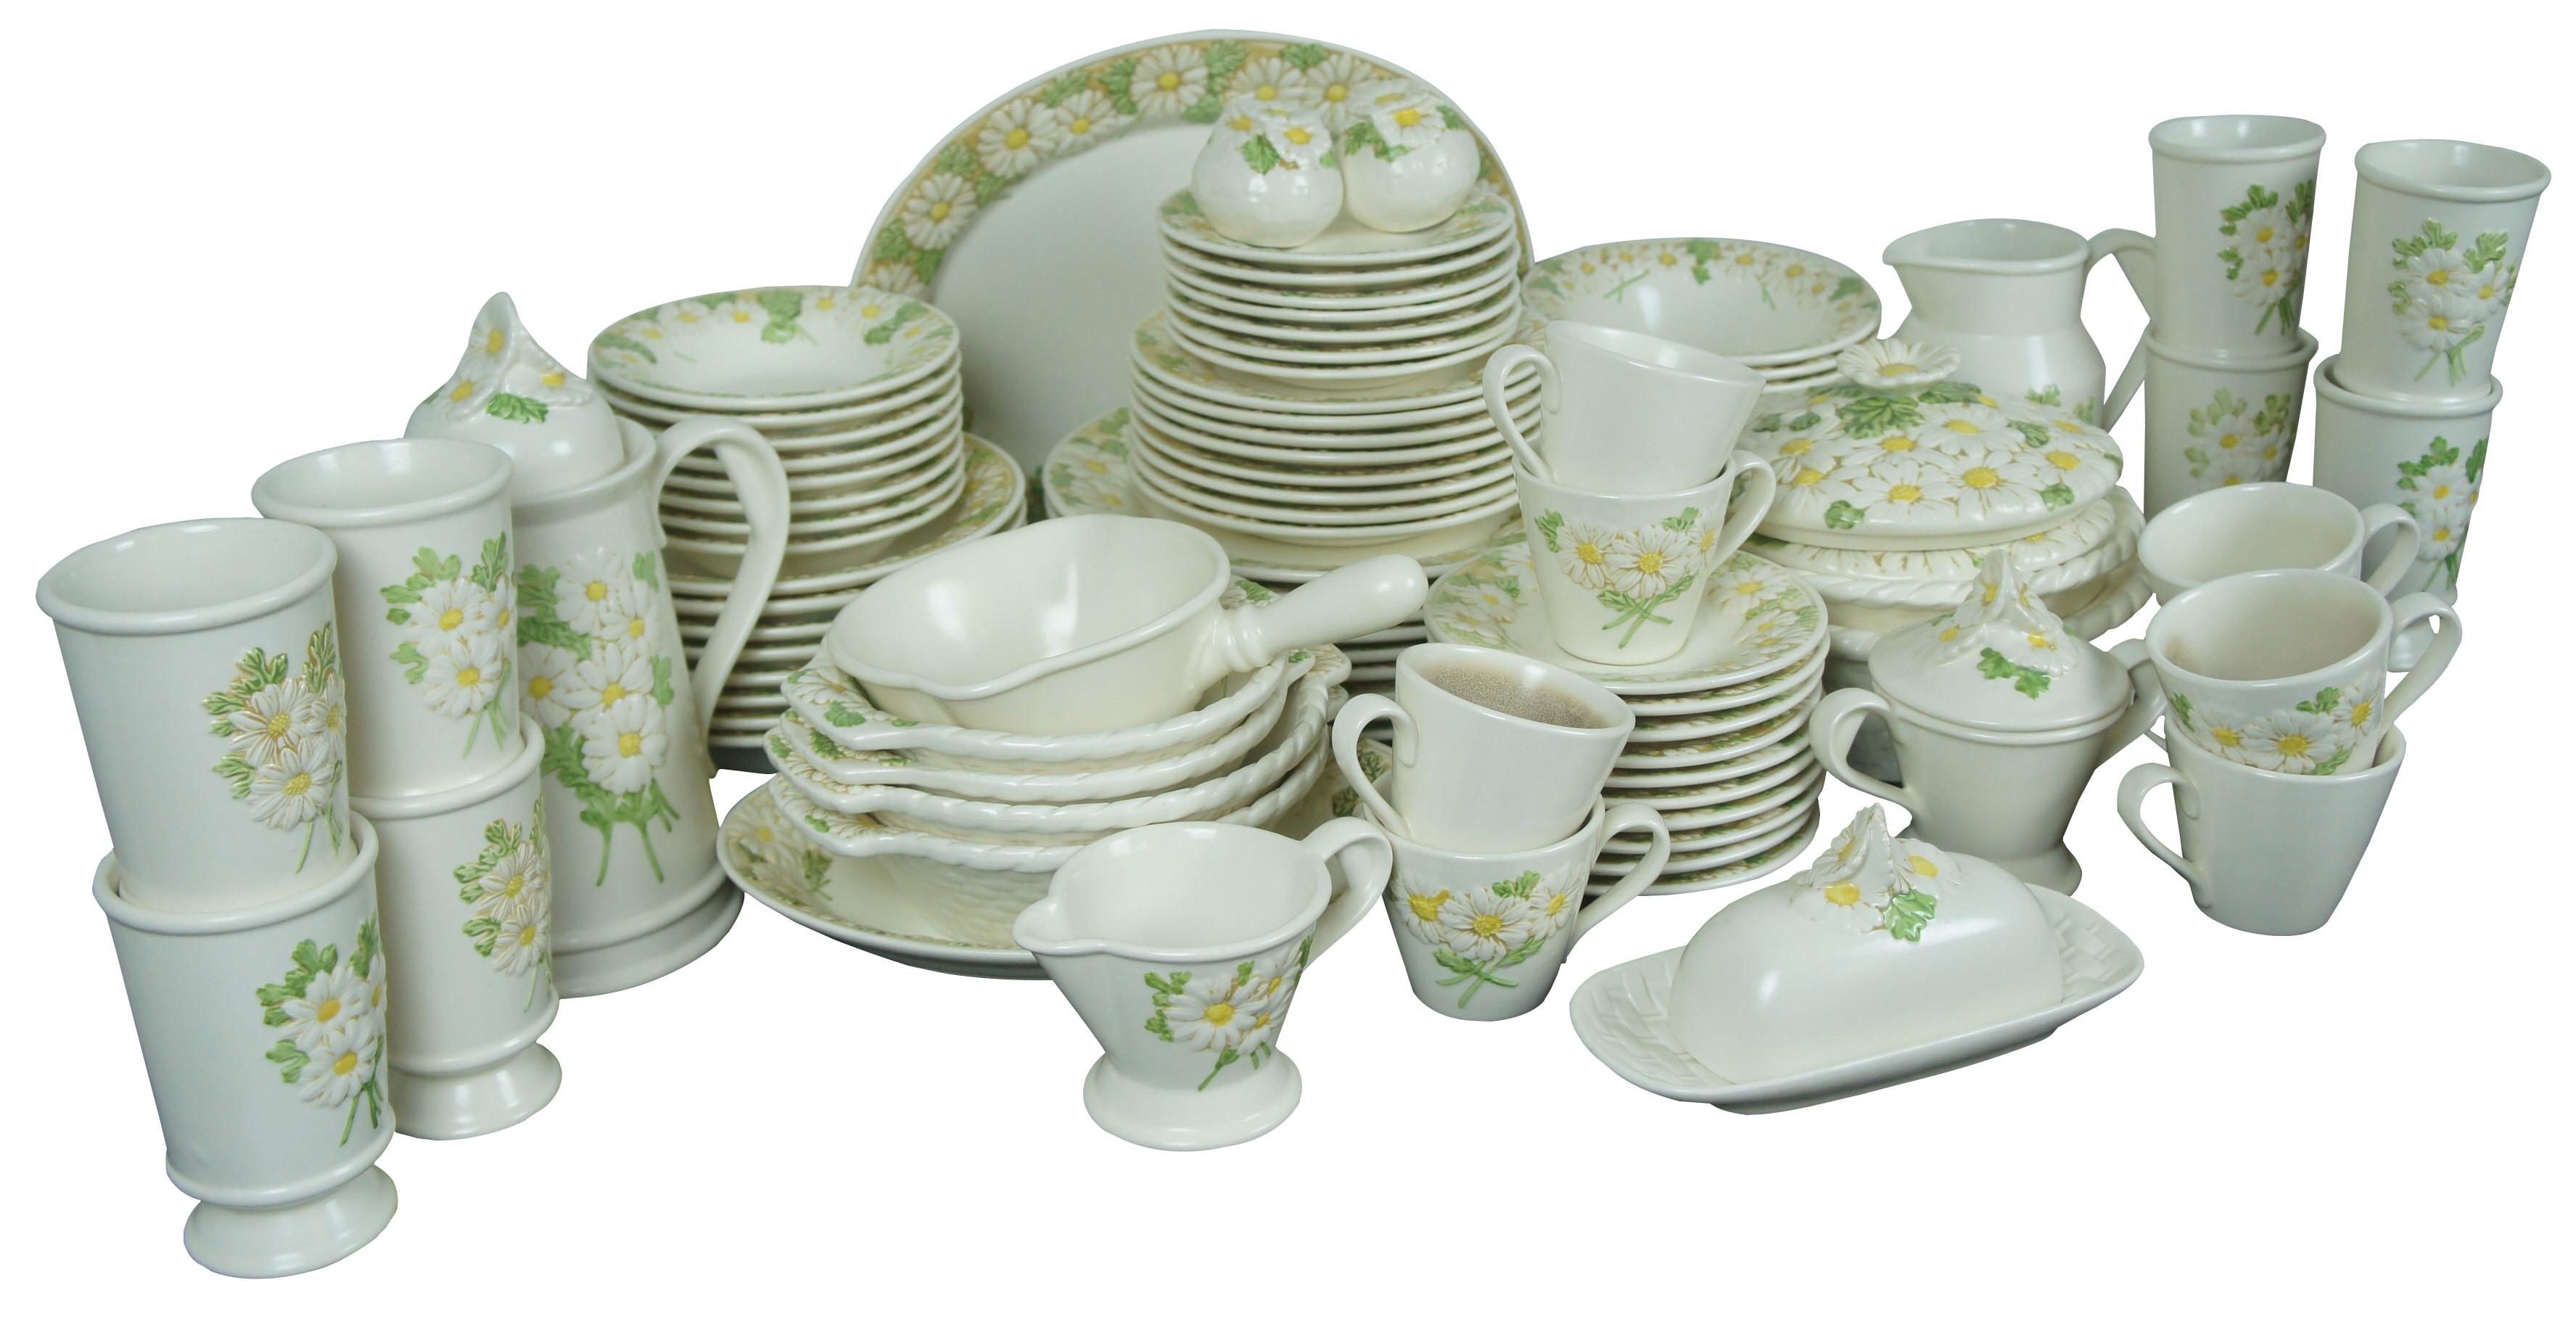 91 piece set of retro mid century china by Metlox of California.  Featuring the Poppy Trail floral pattern with raised daisy.  Set includes platters, plates, bowls, cups, tea / coffee set and many serving pieces.


